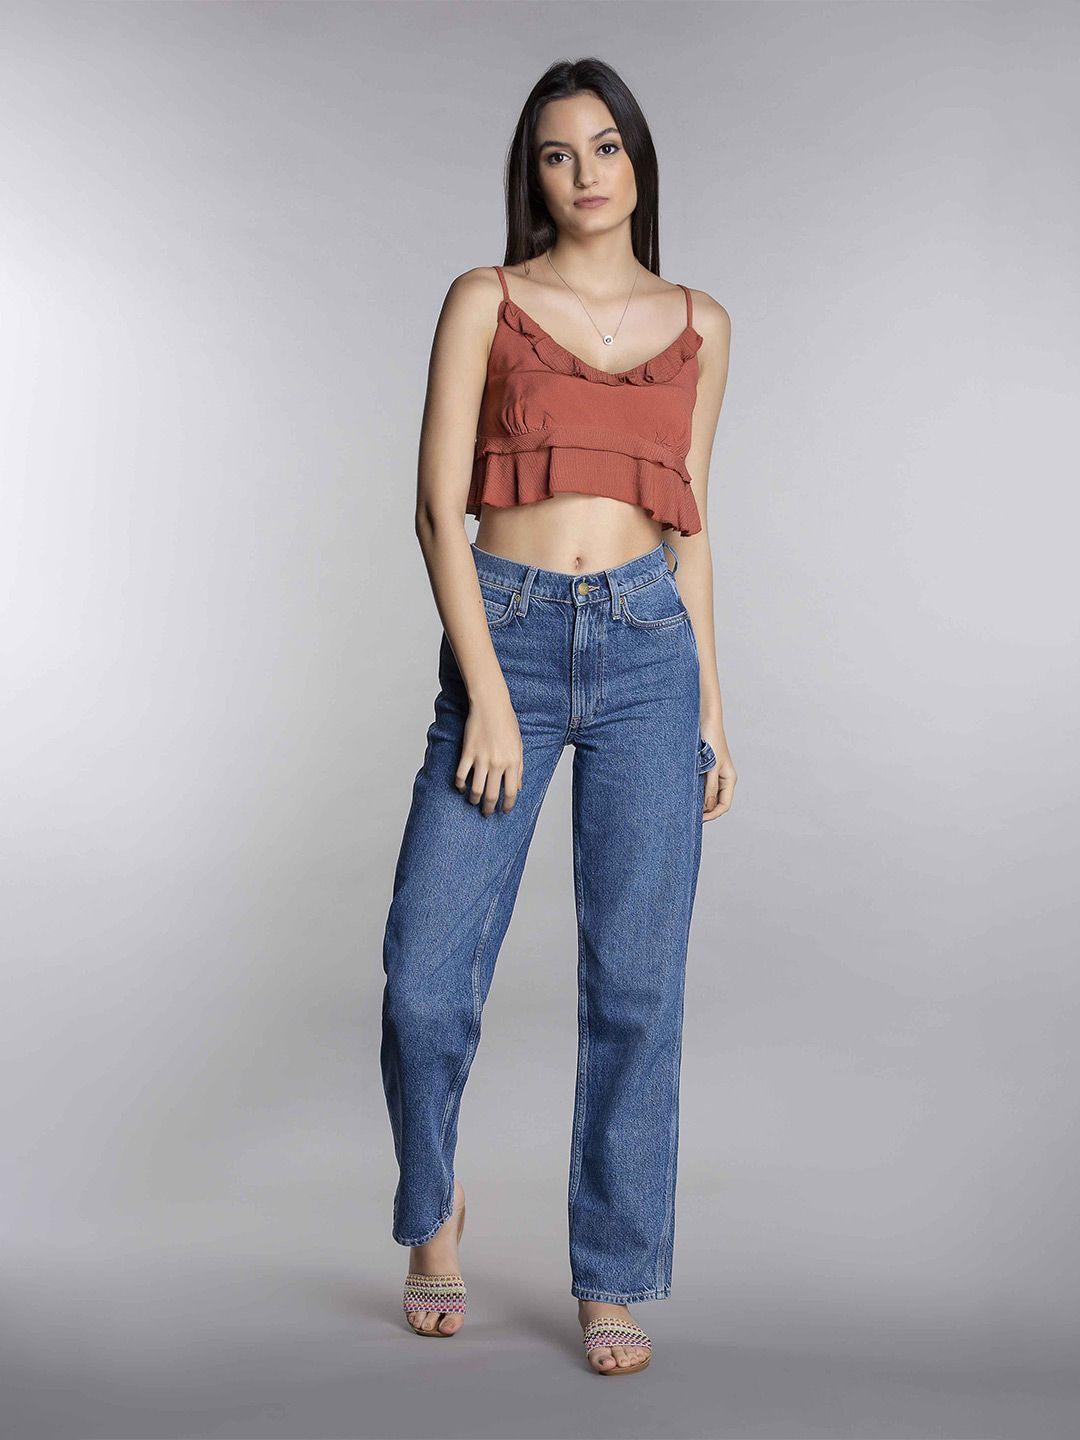 mkoal shoulder straps ruffled pure cotton crop top